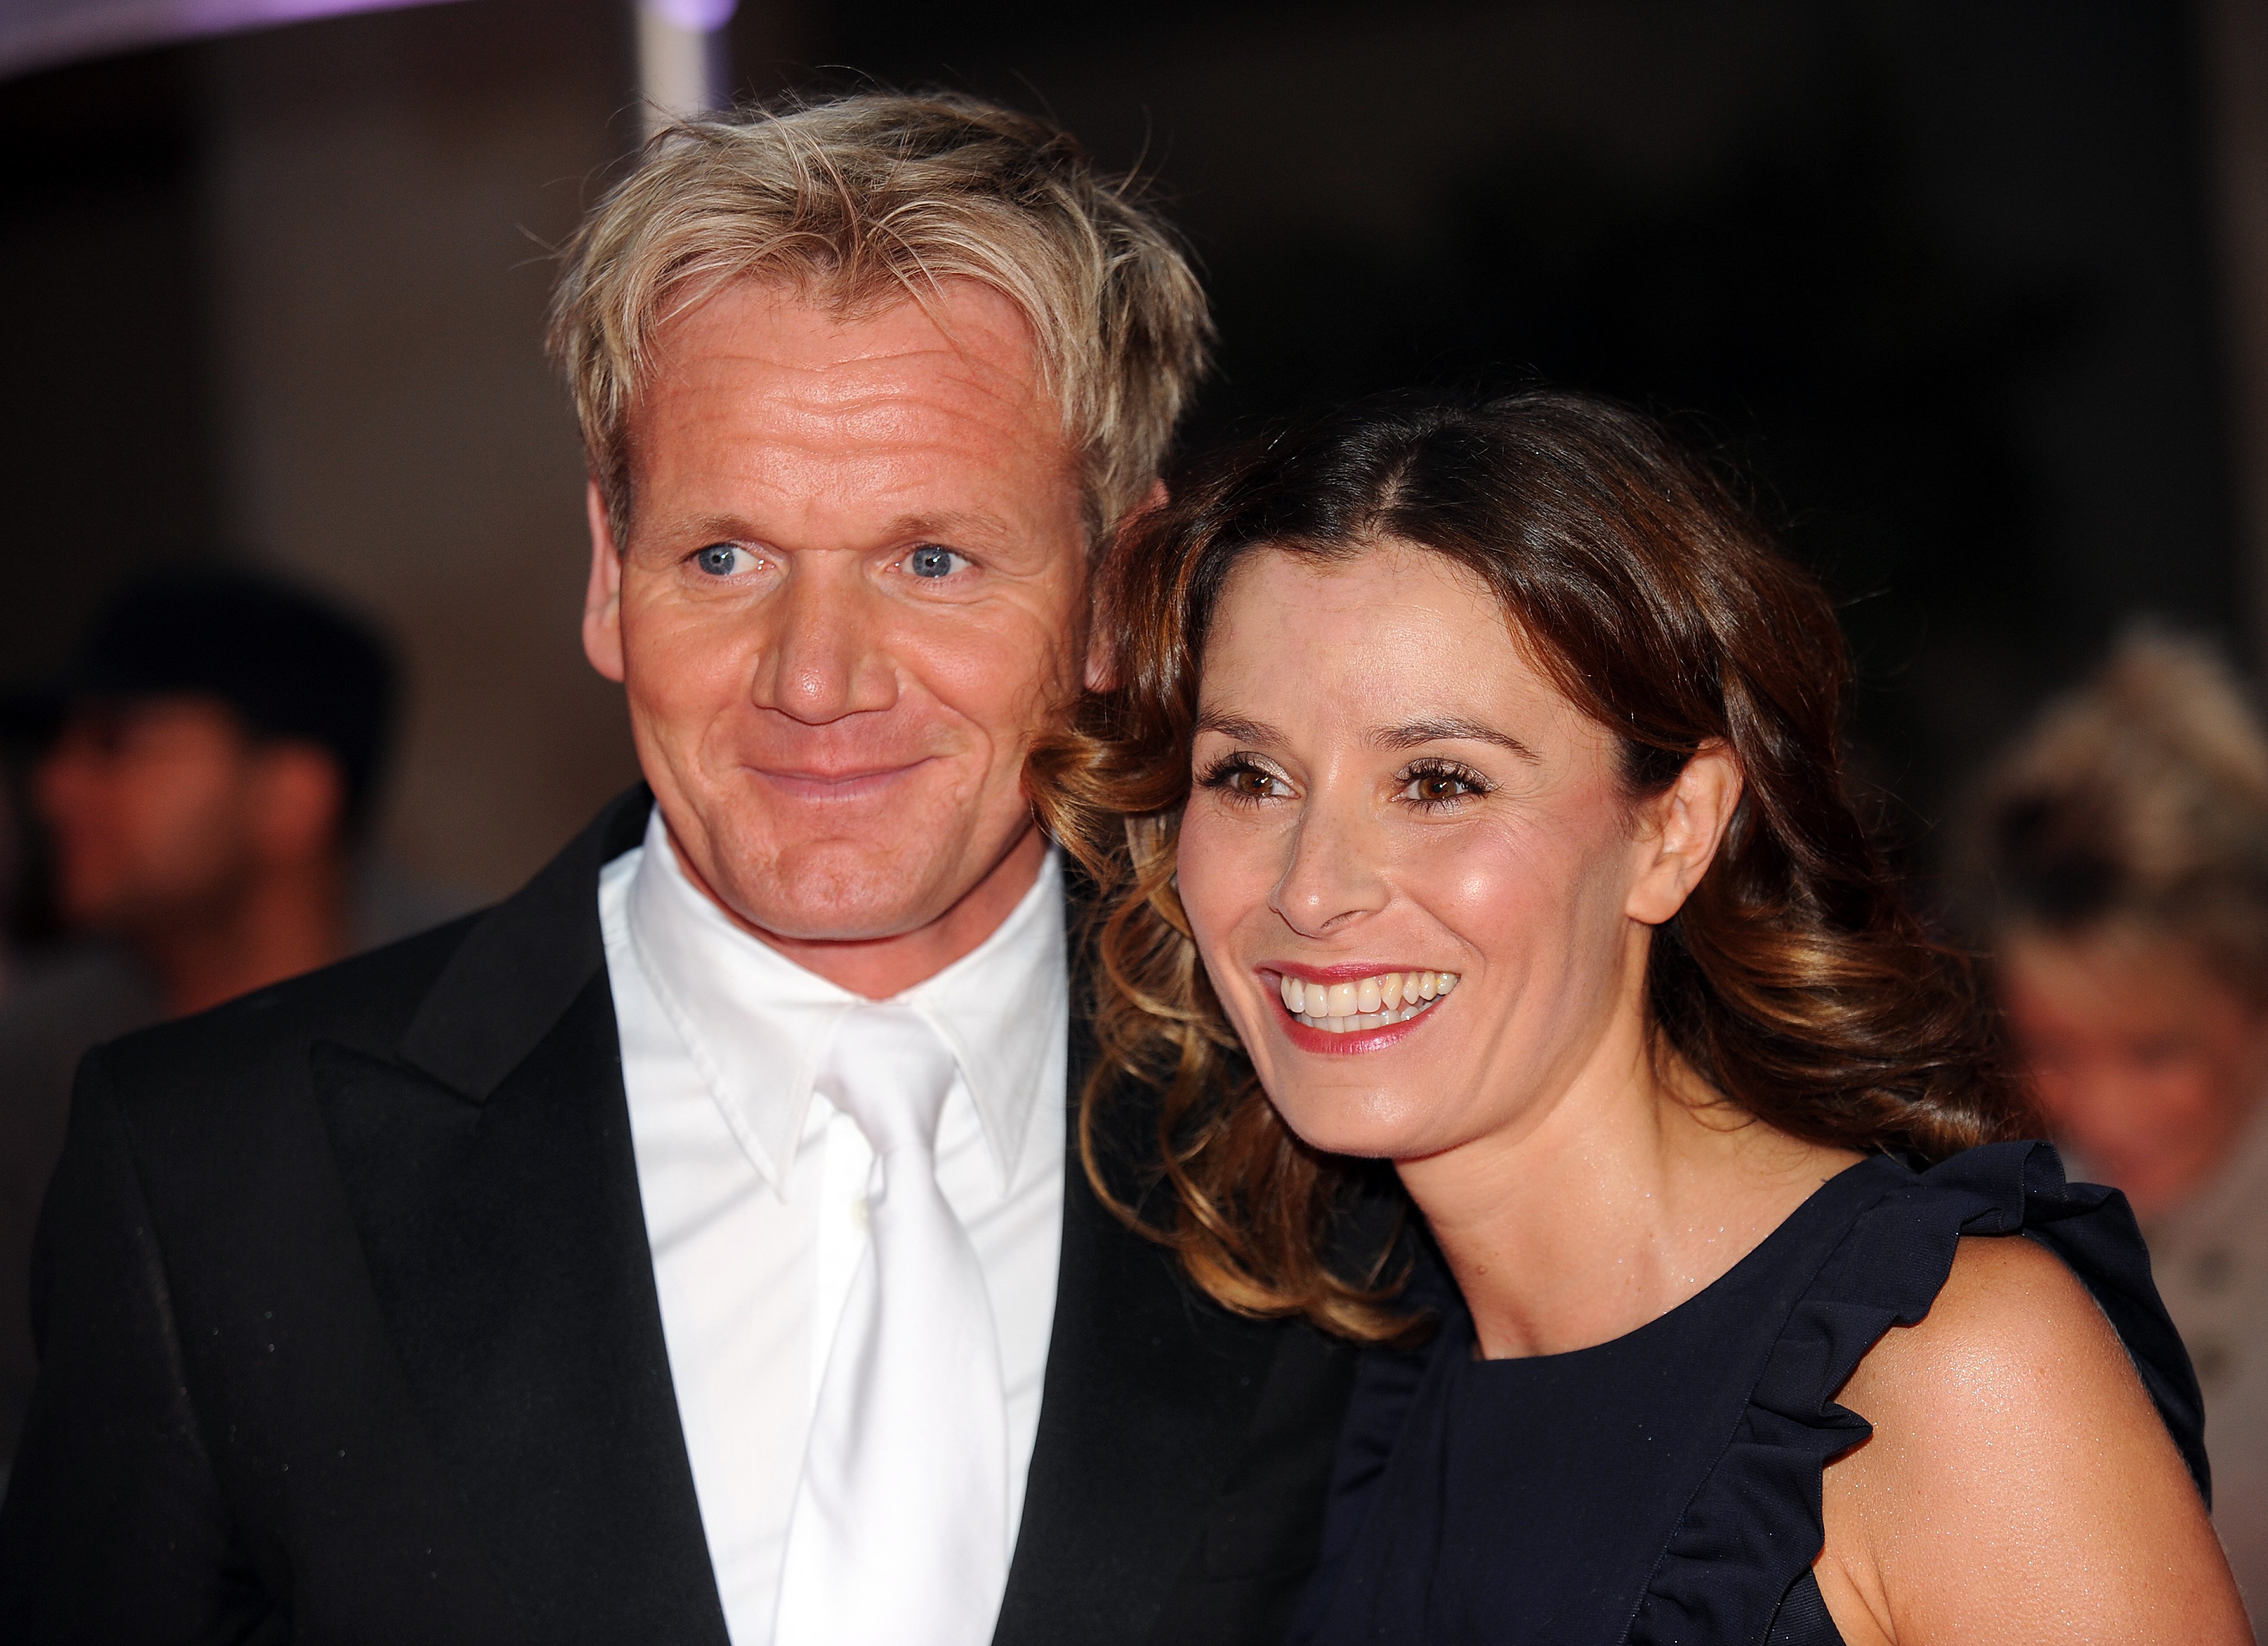 Gordon Ramsay and his wife Tana attend the Pride of Britain Awards in London on November, 2009. | Photo: Getty Images.  